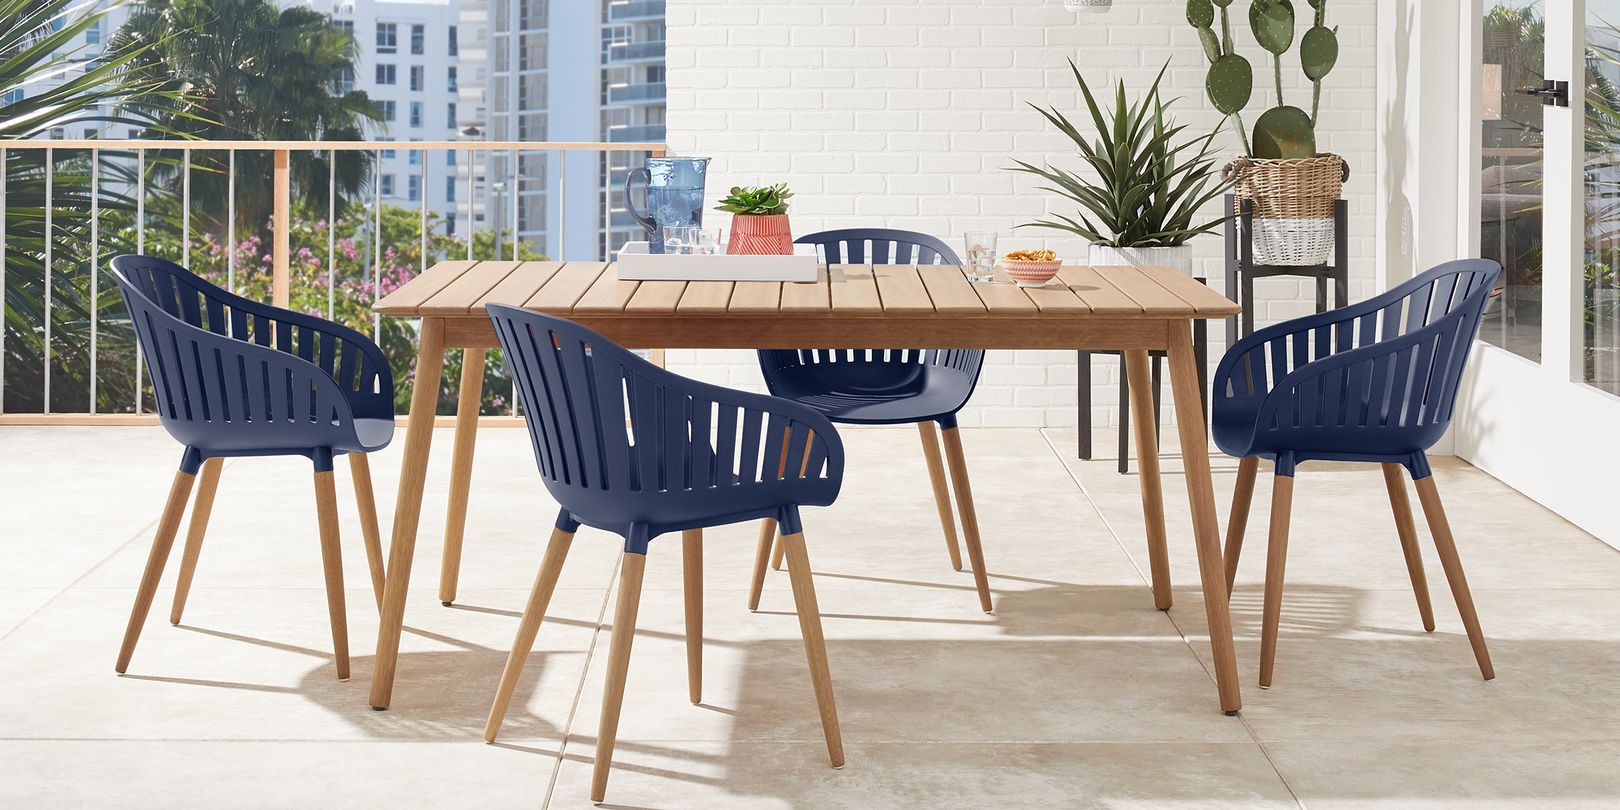 photo of teak patio dining table with blue chairs